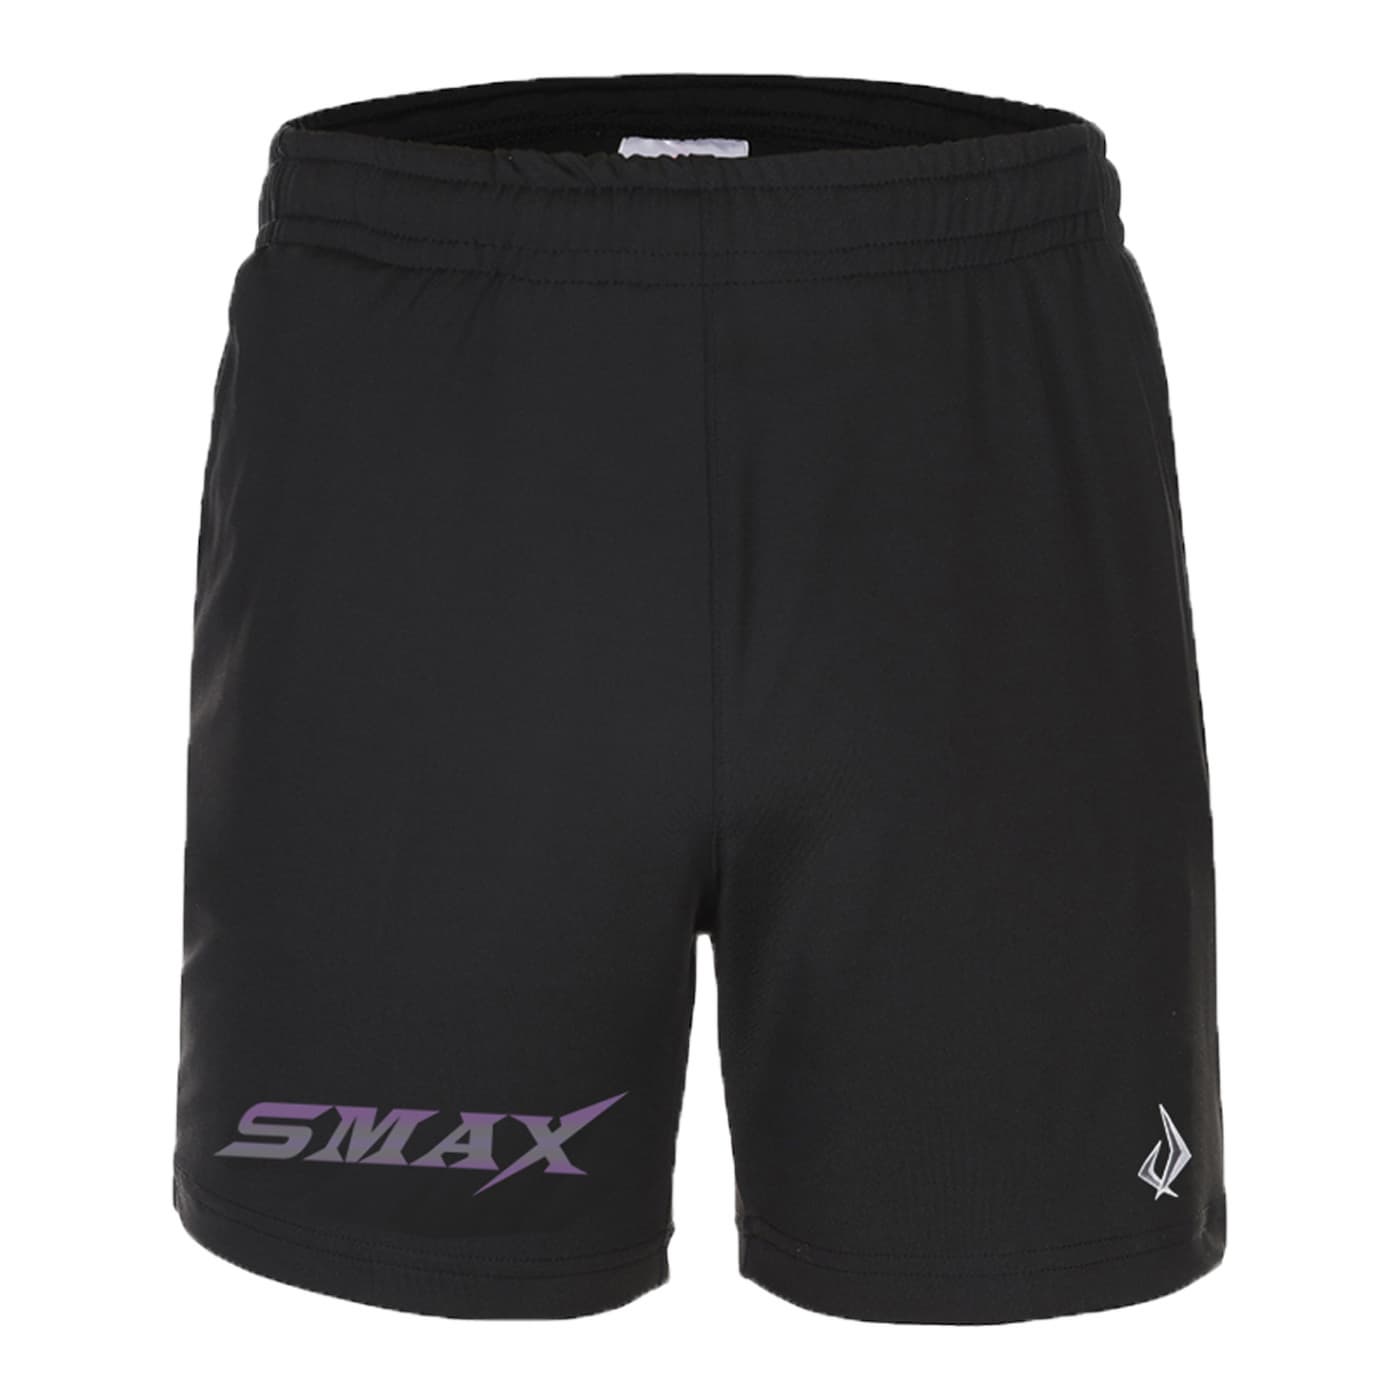 Shorts using the finest spandex fabric